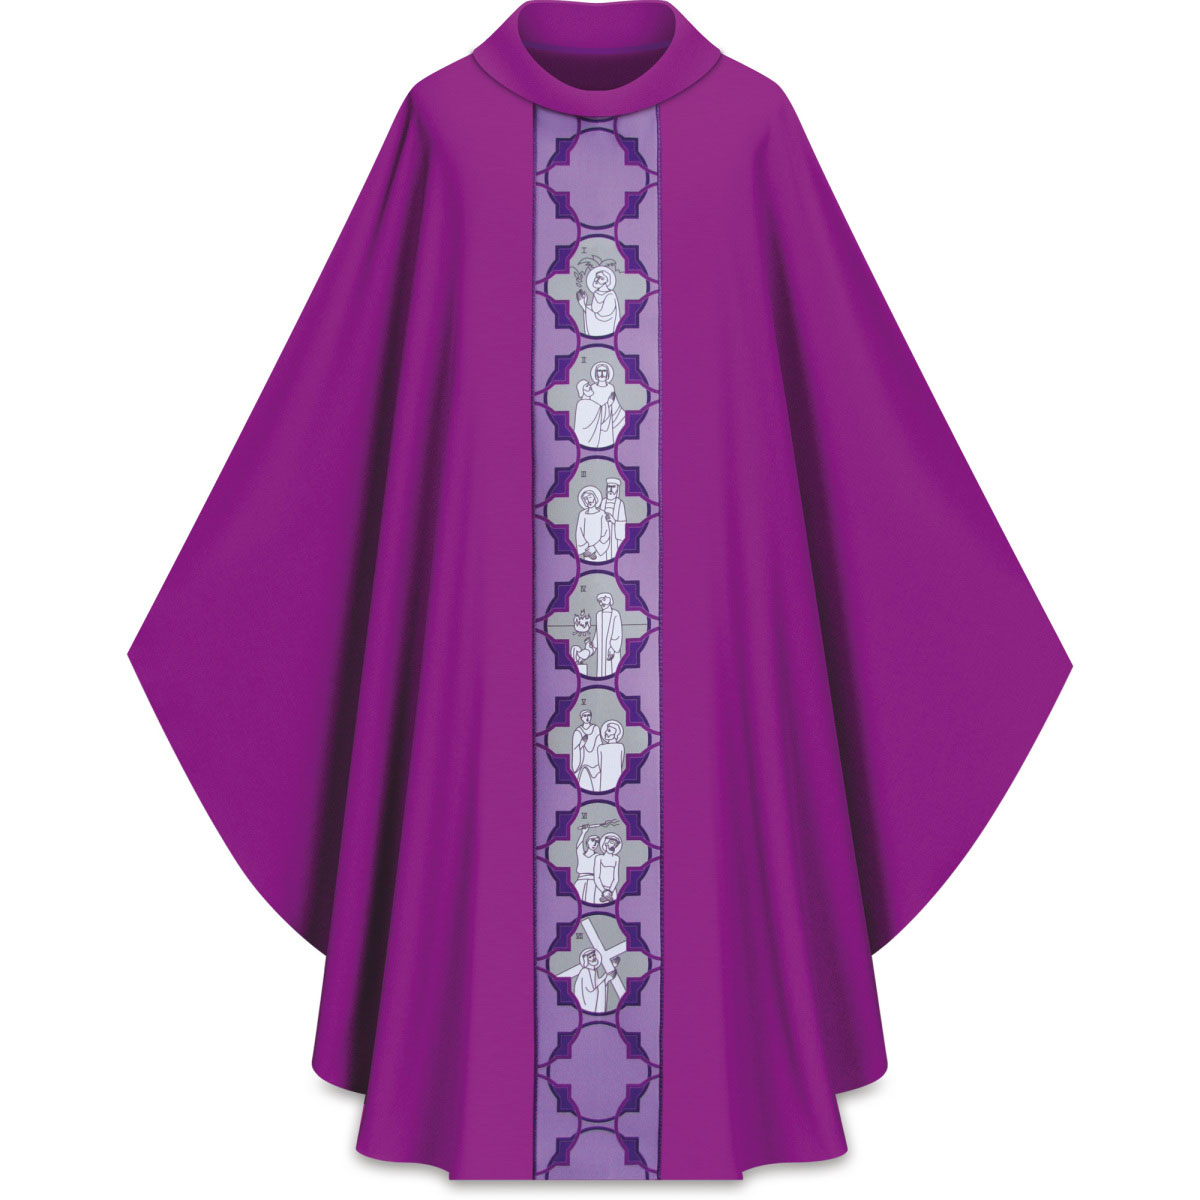 Stations of the Cross Chasuble